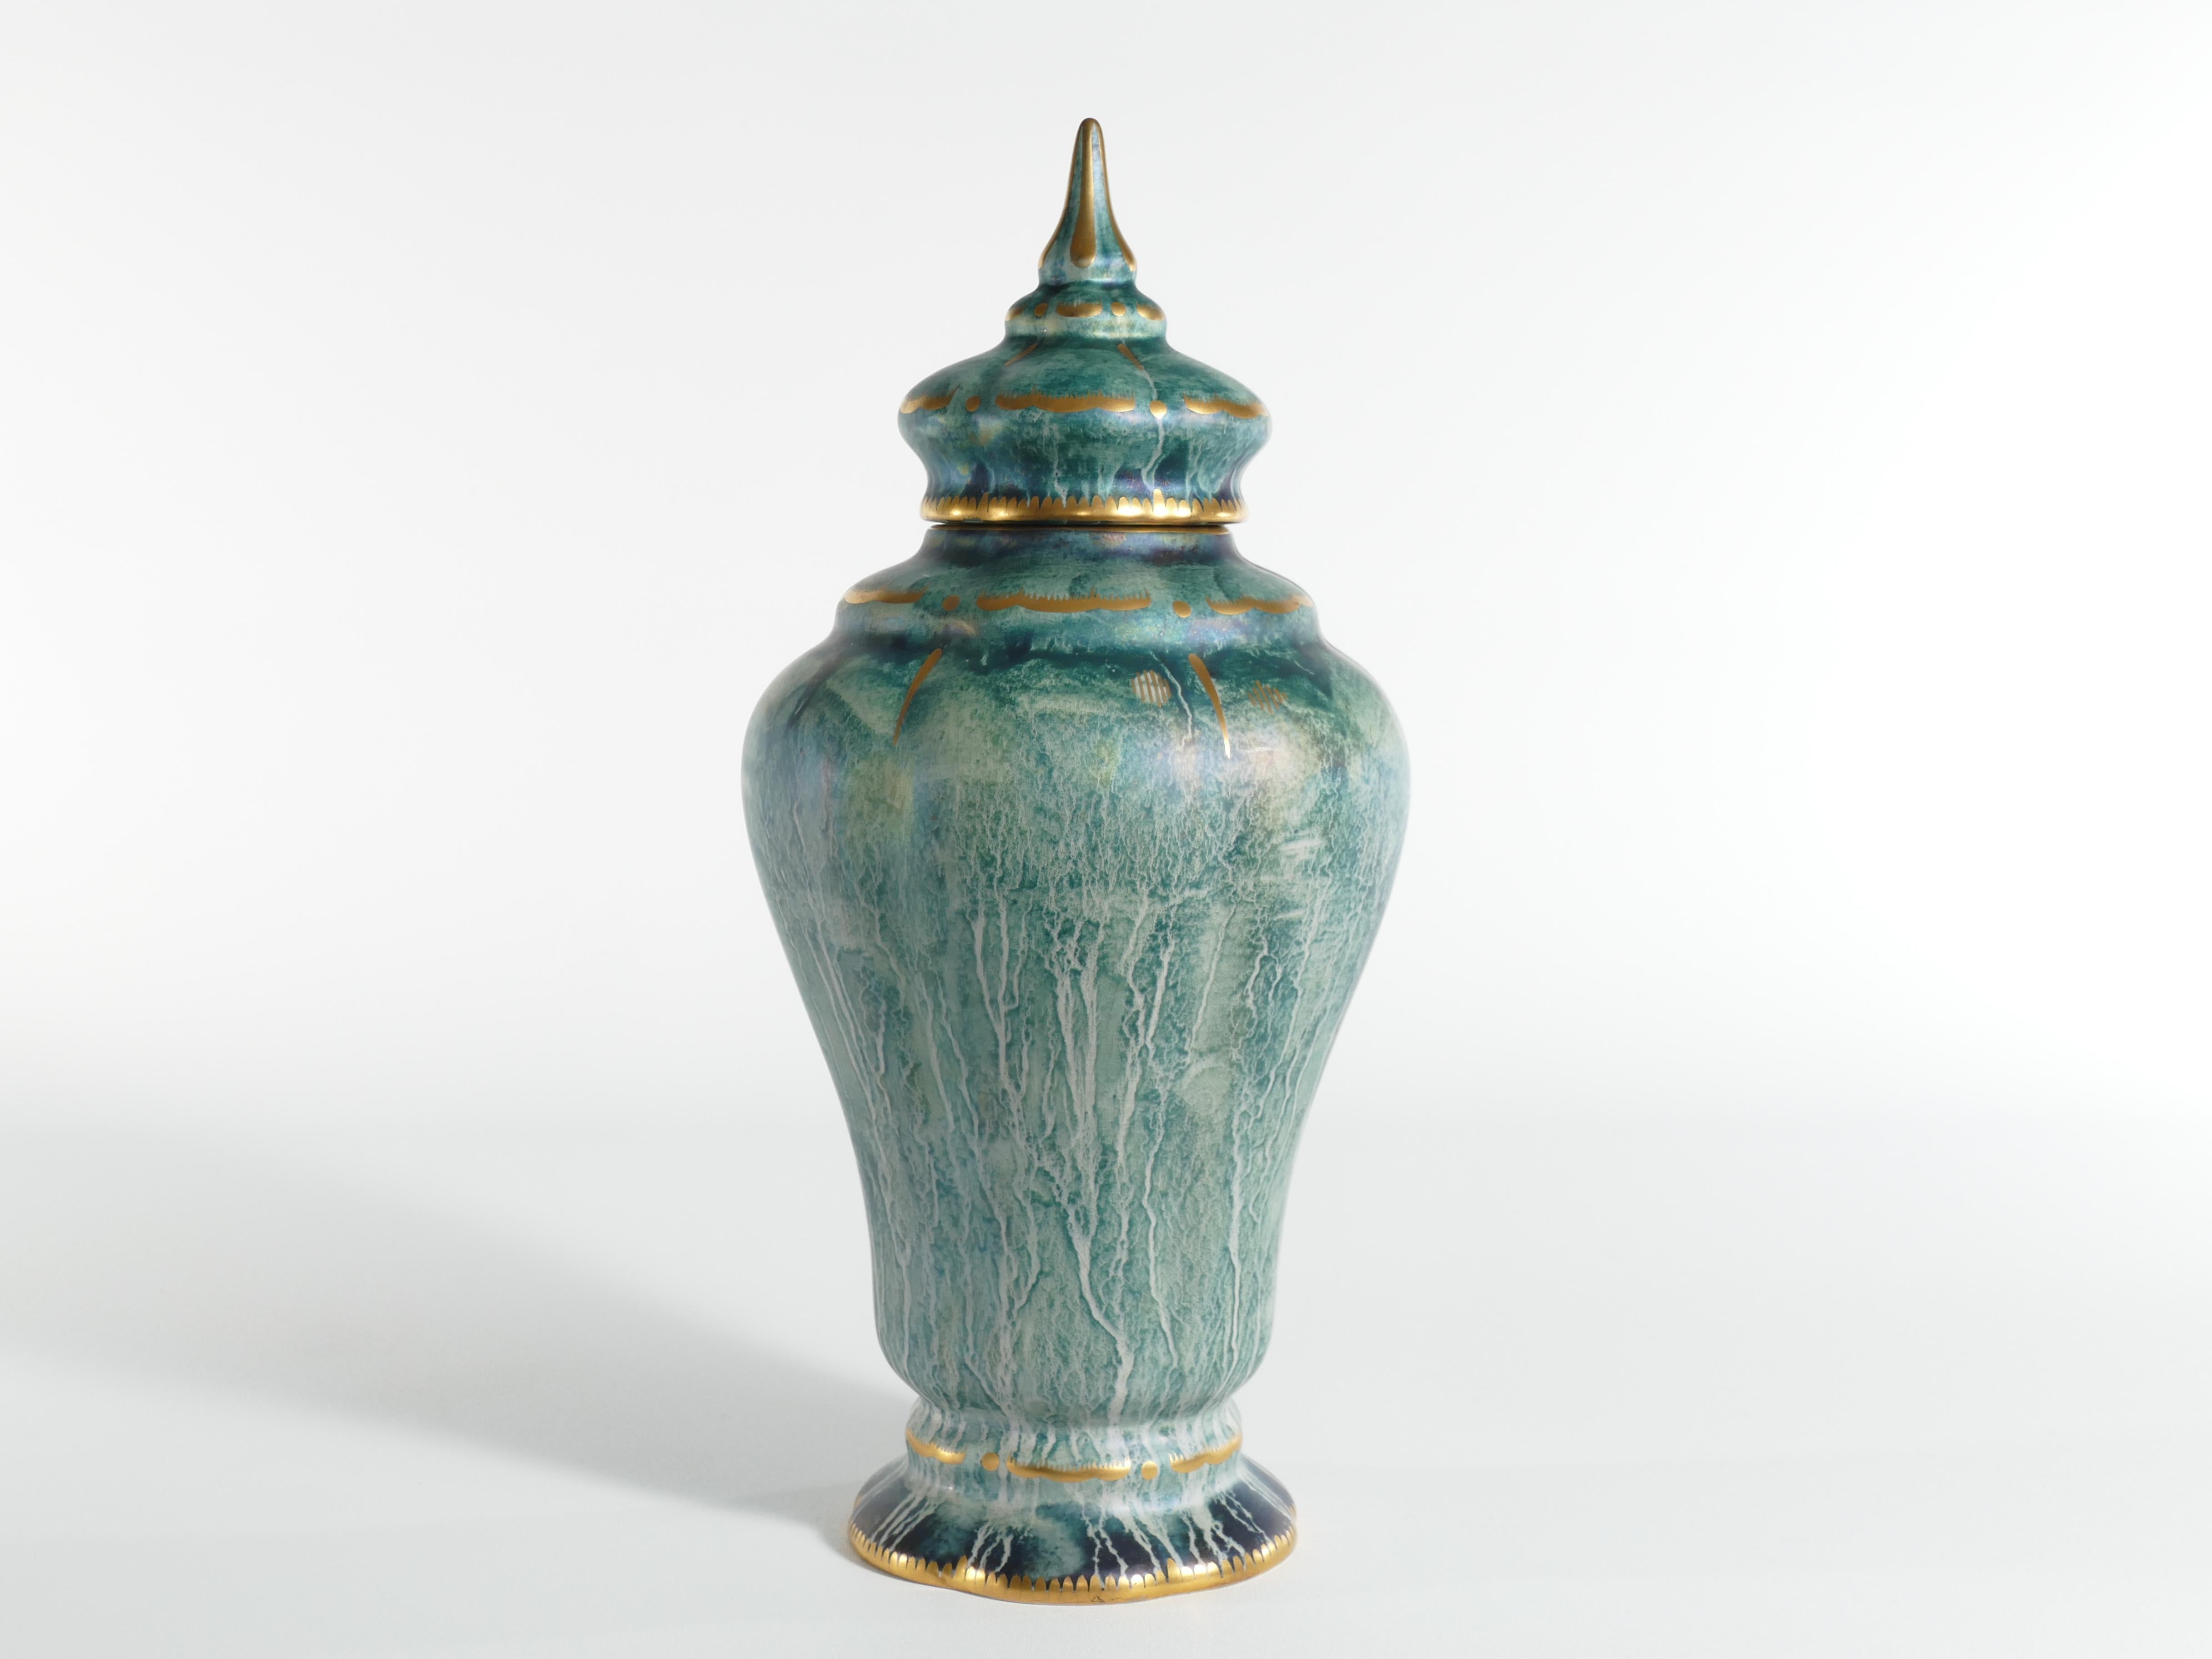 This large and exquisite handmade lidded vase, is skillfully crafted by the renowned Swedish ceramic artist Josef Ekberg. He is recognized as one of Sweden's foremost ceramic artists during his era.

This particular piece is a splendid